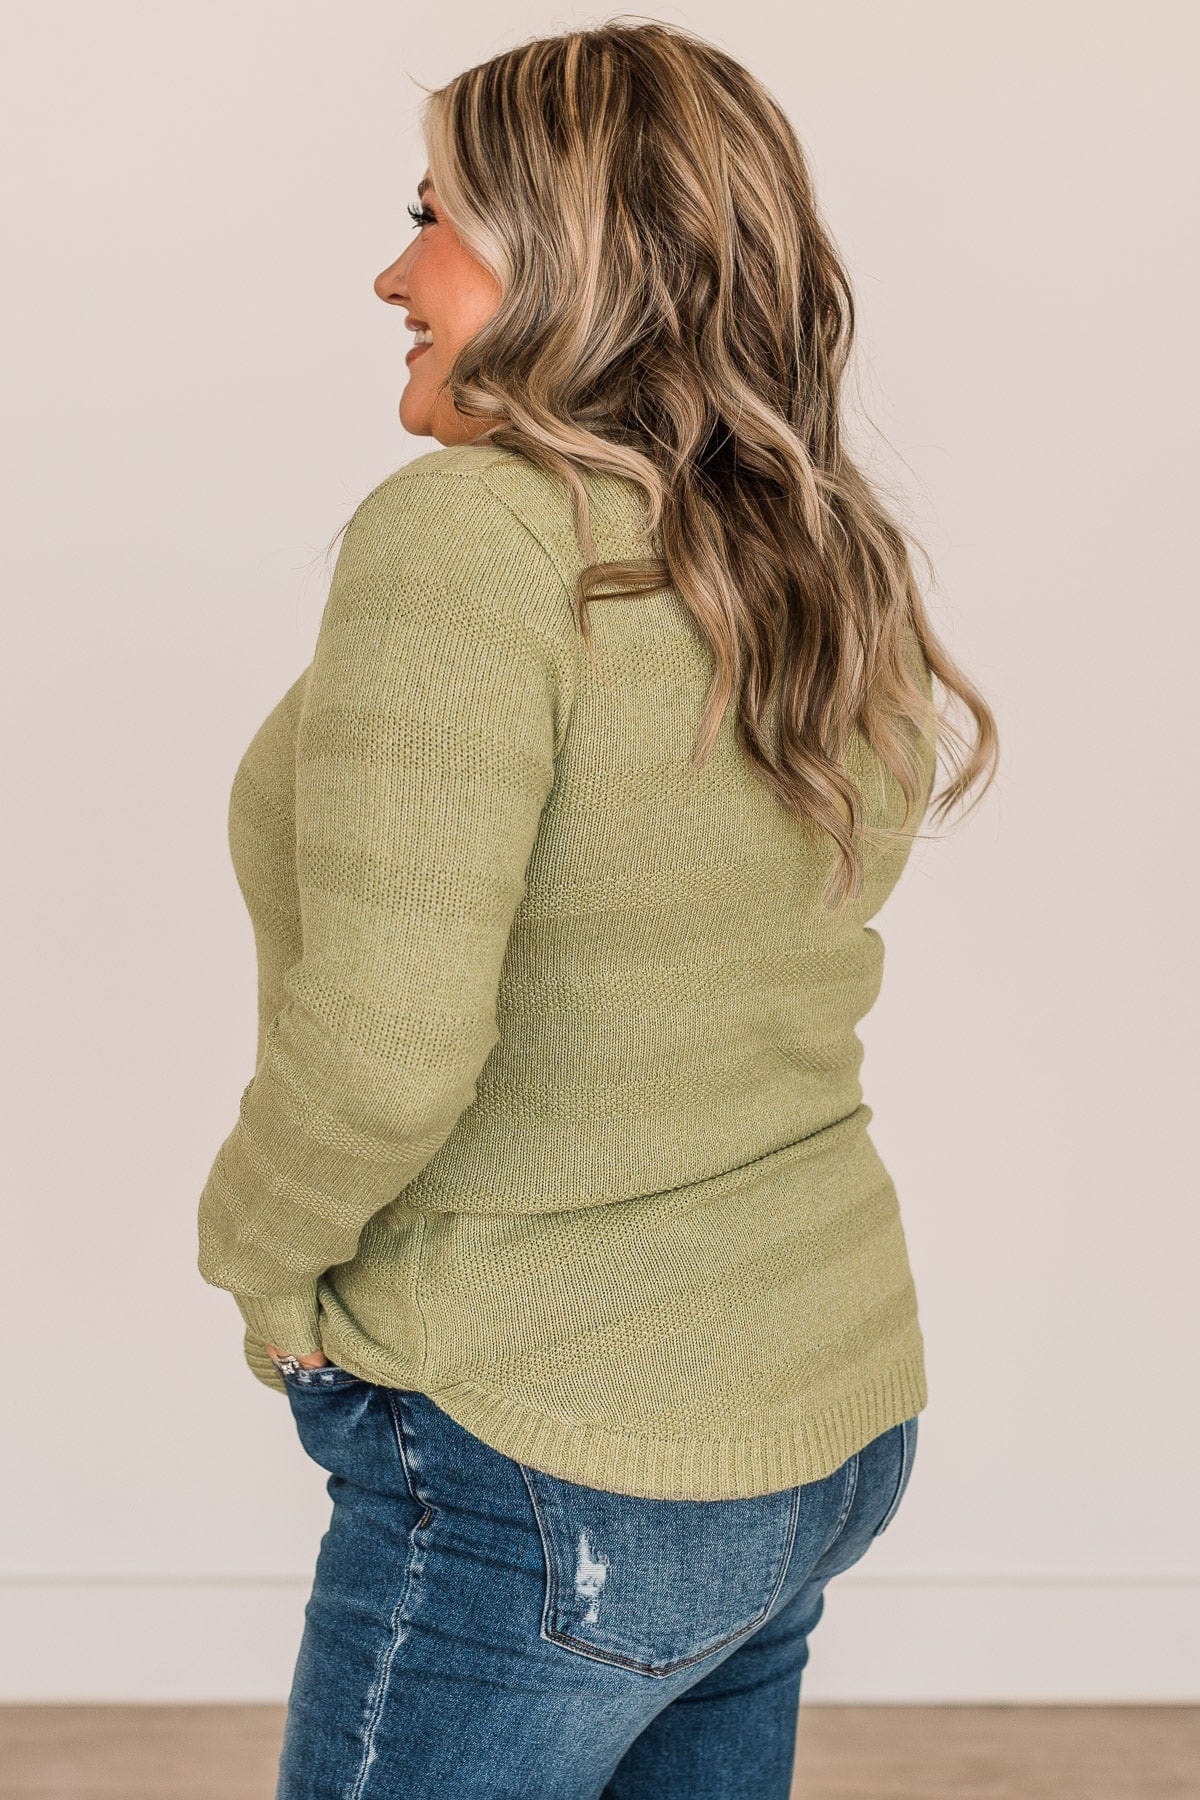 Making It Look Easy Knit Sweater- Sage